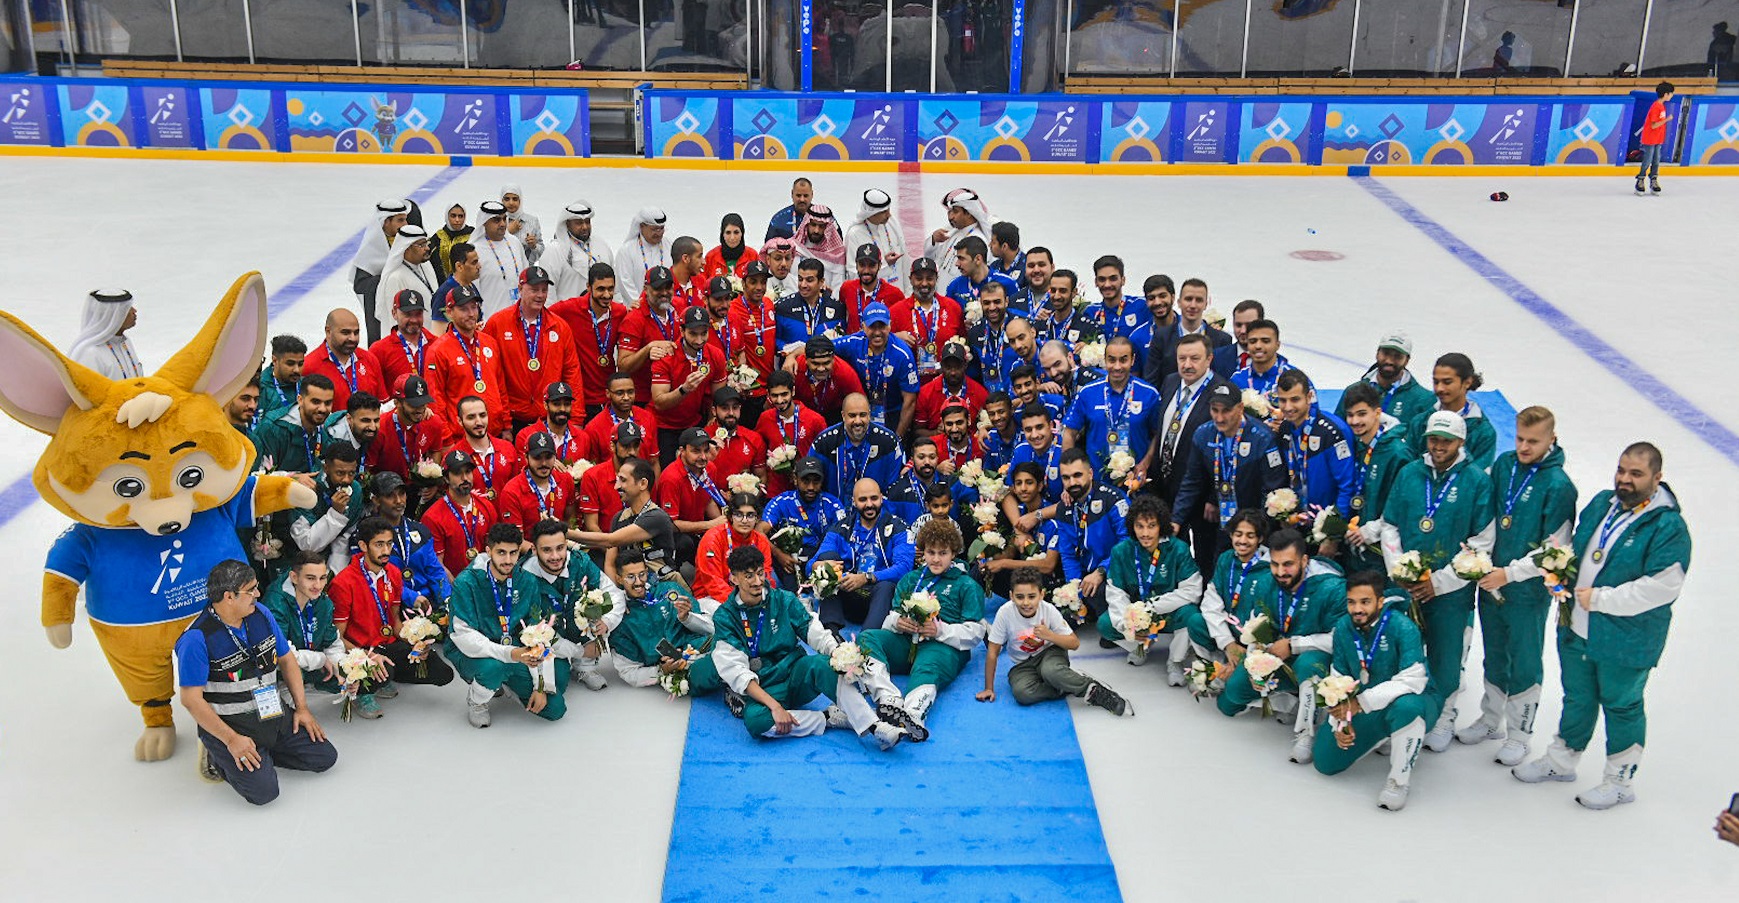 All winners of the three top posts of Ice Hockey GCC Games